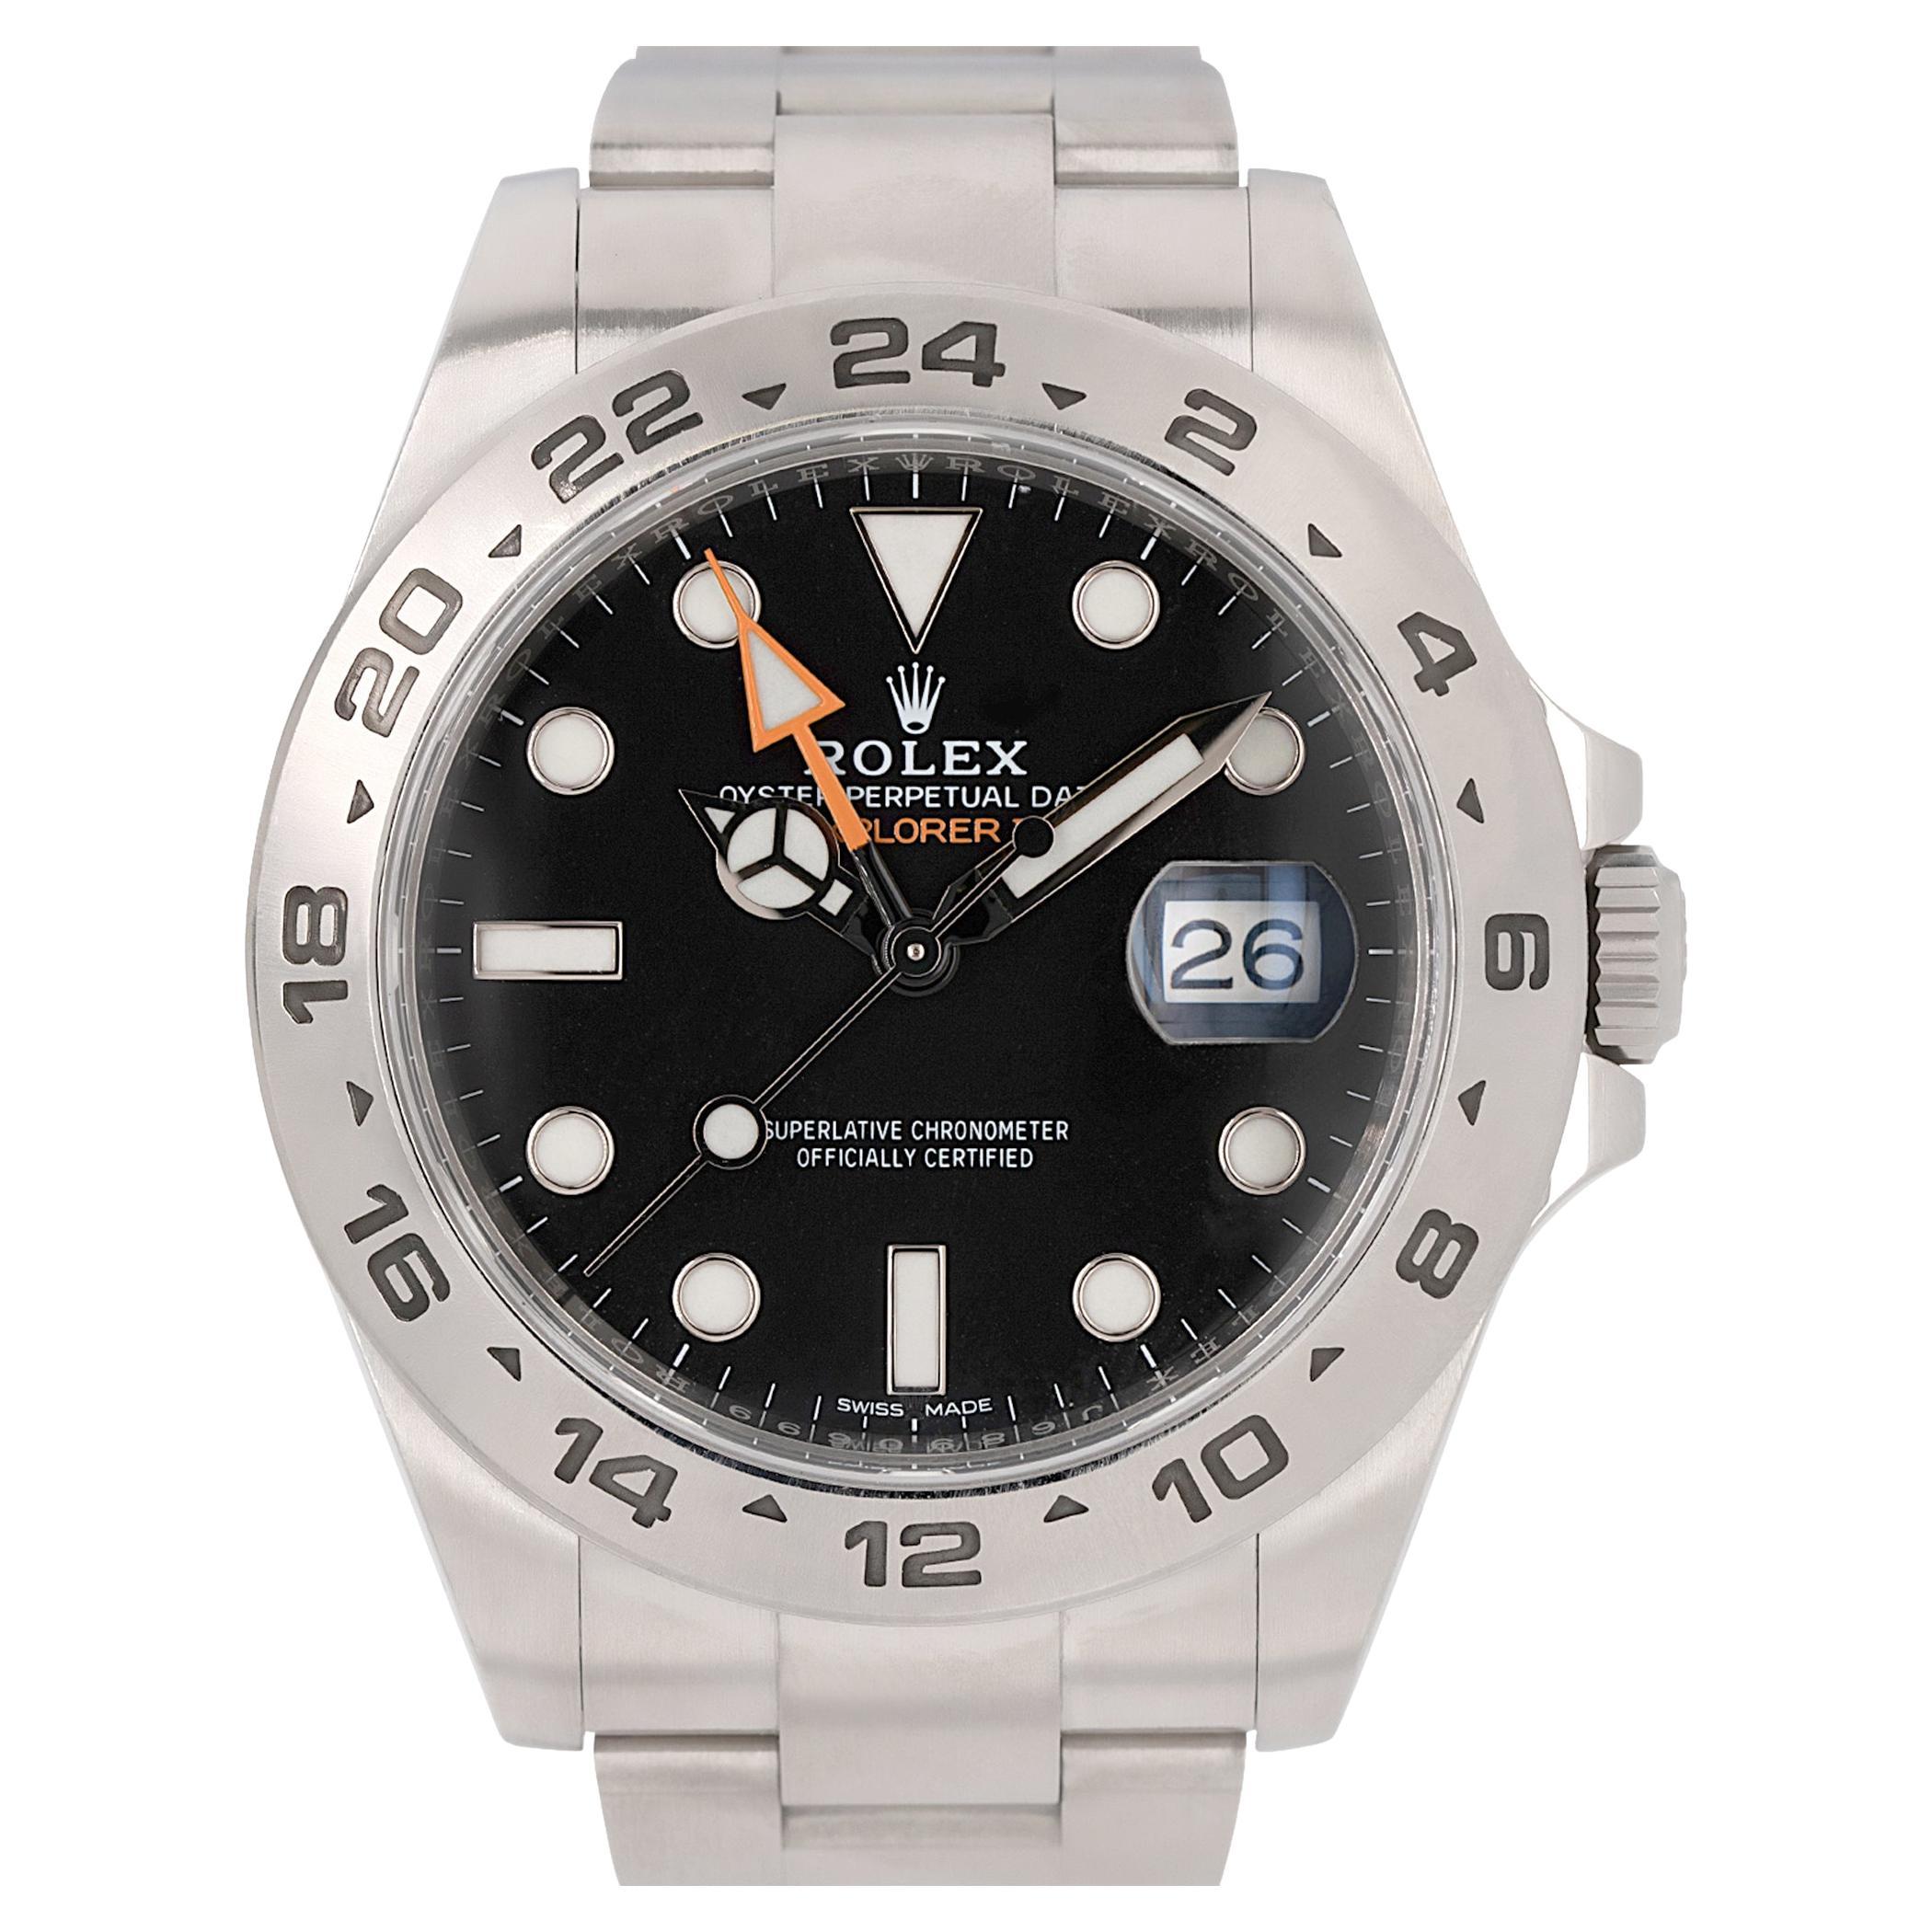 Rolex 216570 Explorer II Stainless Steel Black Dial Watch For Sale